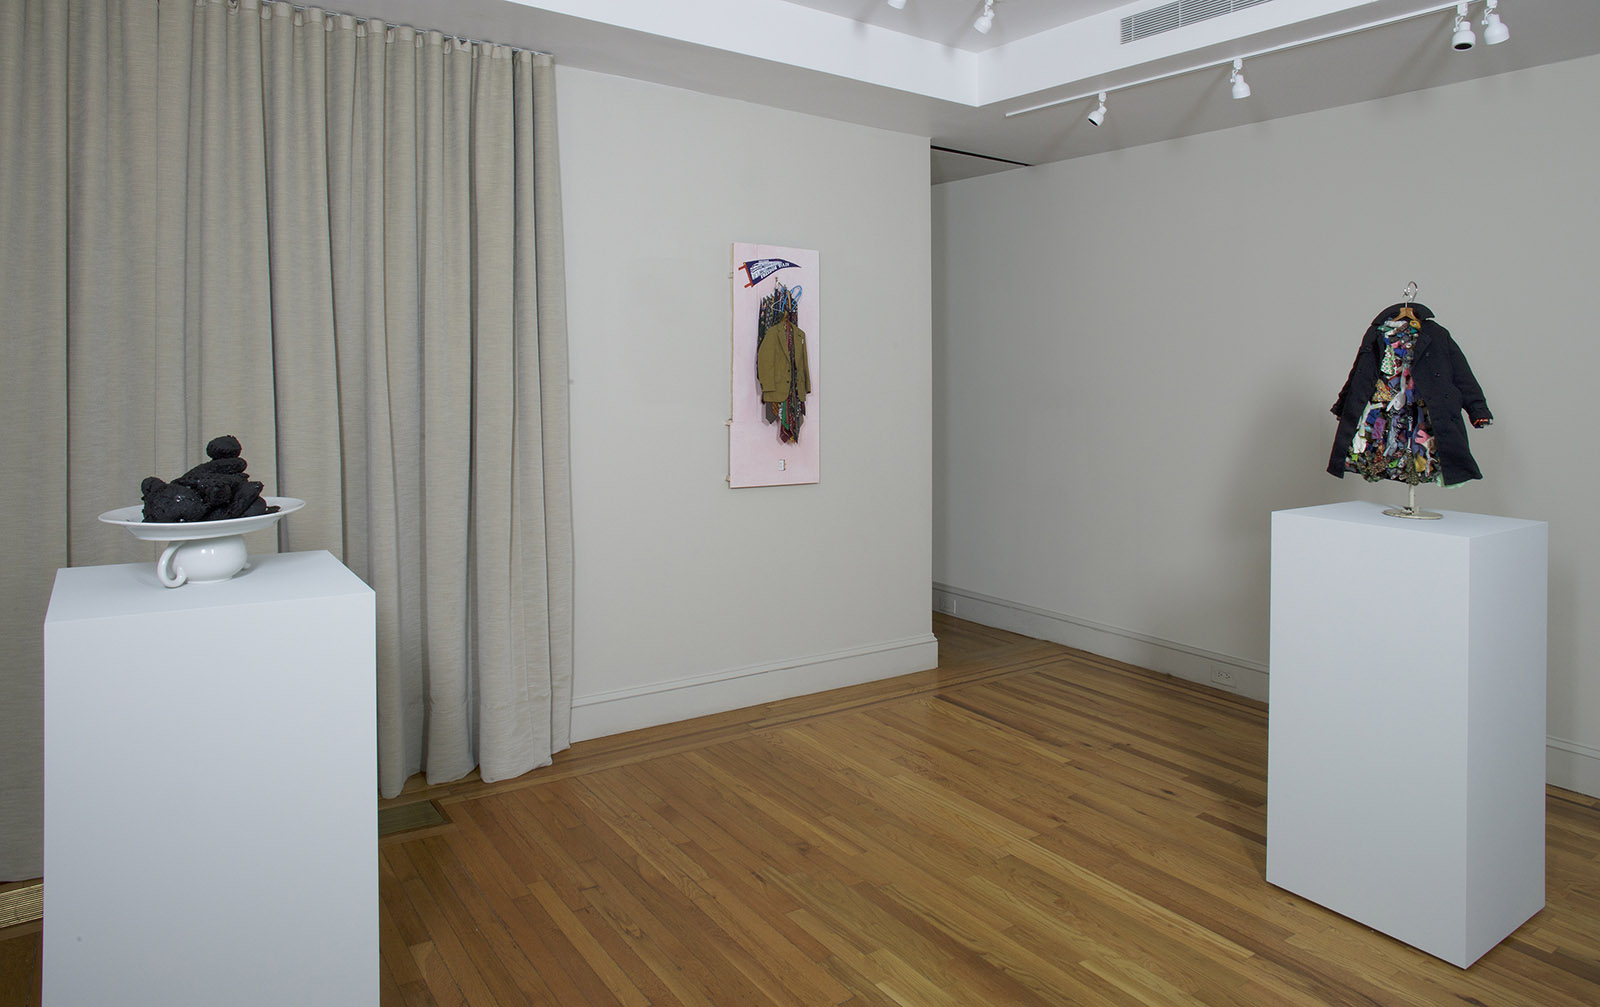 Charles LeDray: Tar Bears (1991), Freedom Train (2013–2015), and Overcoat (2004), on view at the Craig Starr Gallery